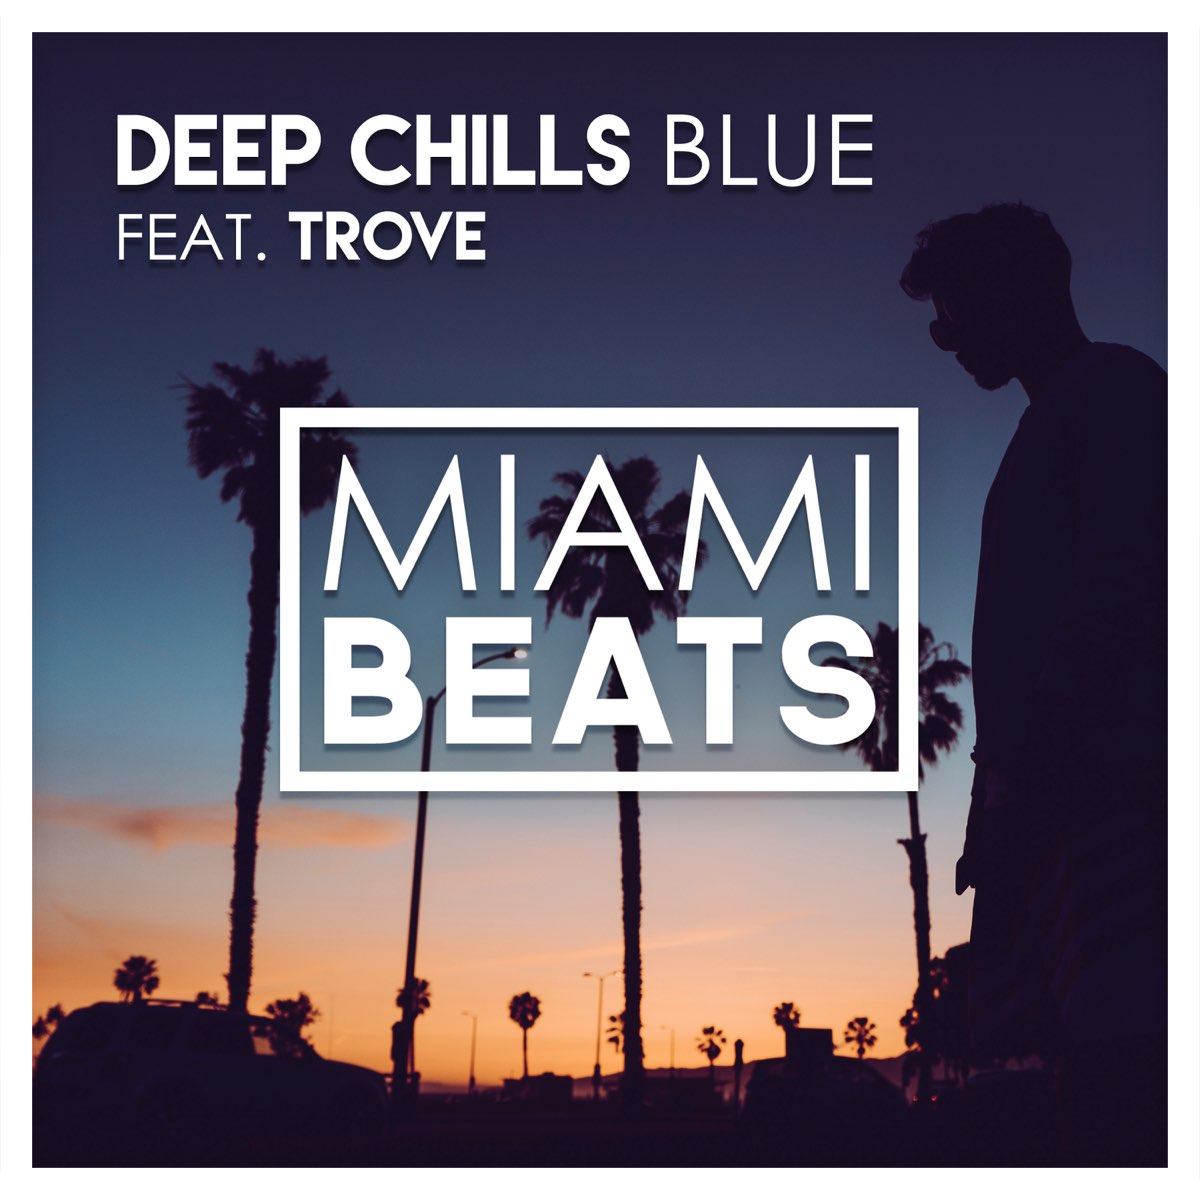 Deep Chill. Miami Beats. Blue featuring. Deep Chills feat. Ivie.